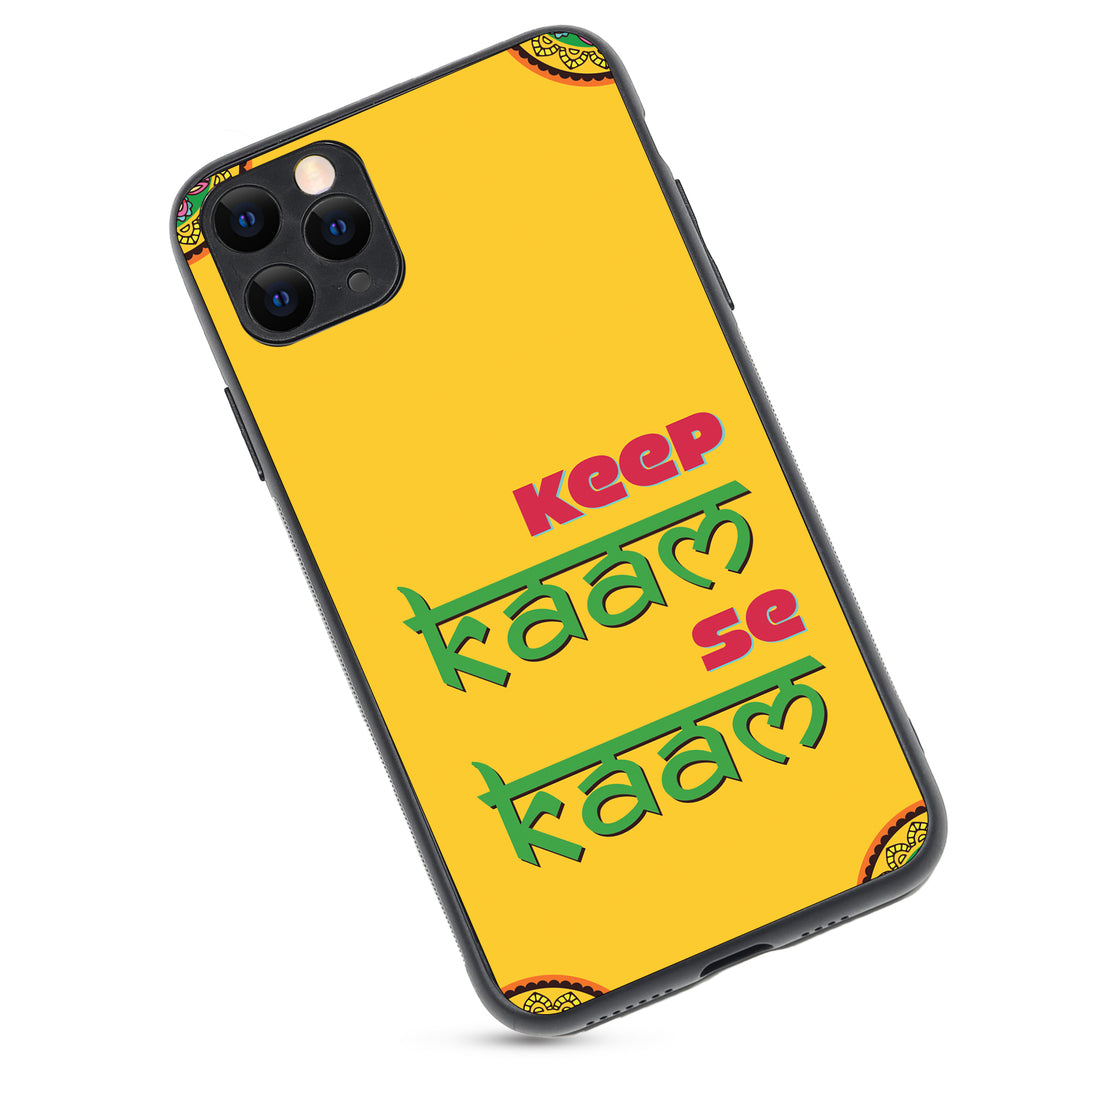 Keep Kaam Motivational Quotes iPhone 11 Pro Max Case